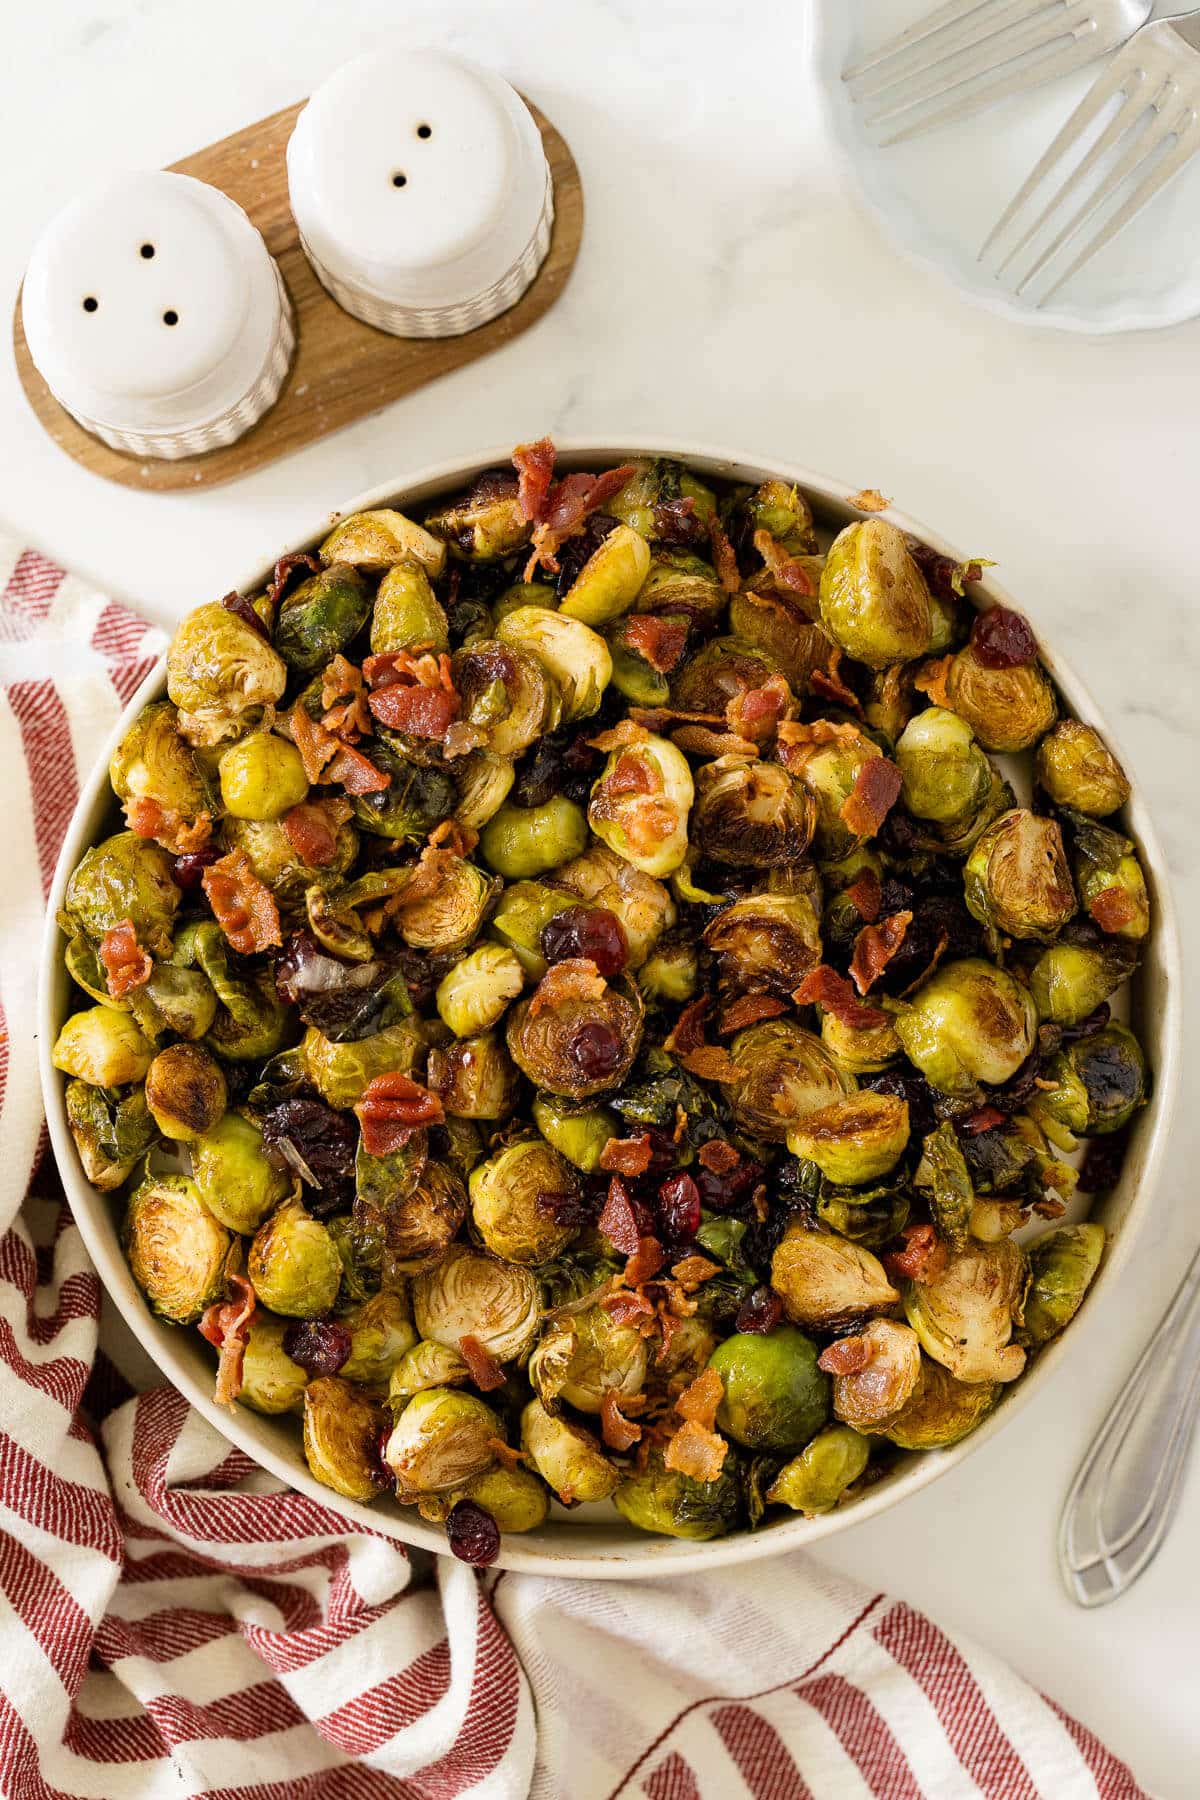 Roasted brussel sprouts in a bowl.